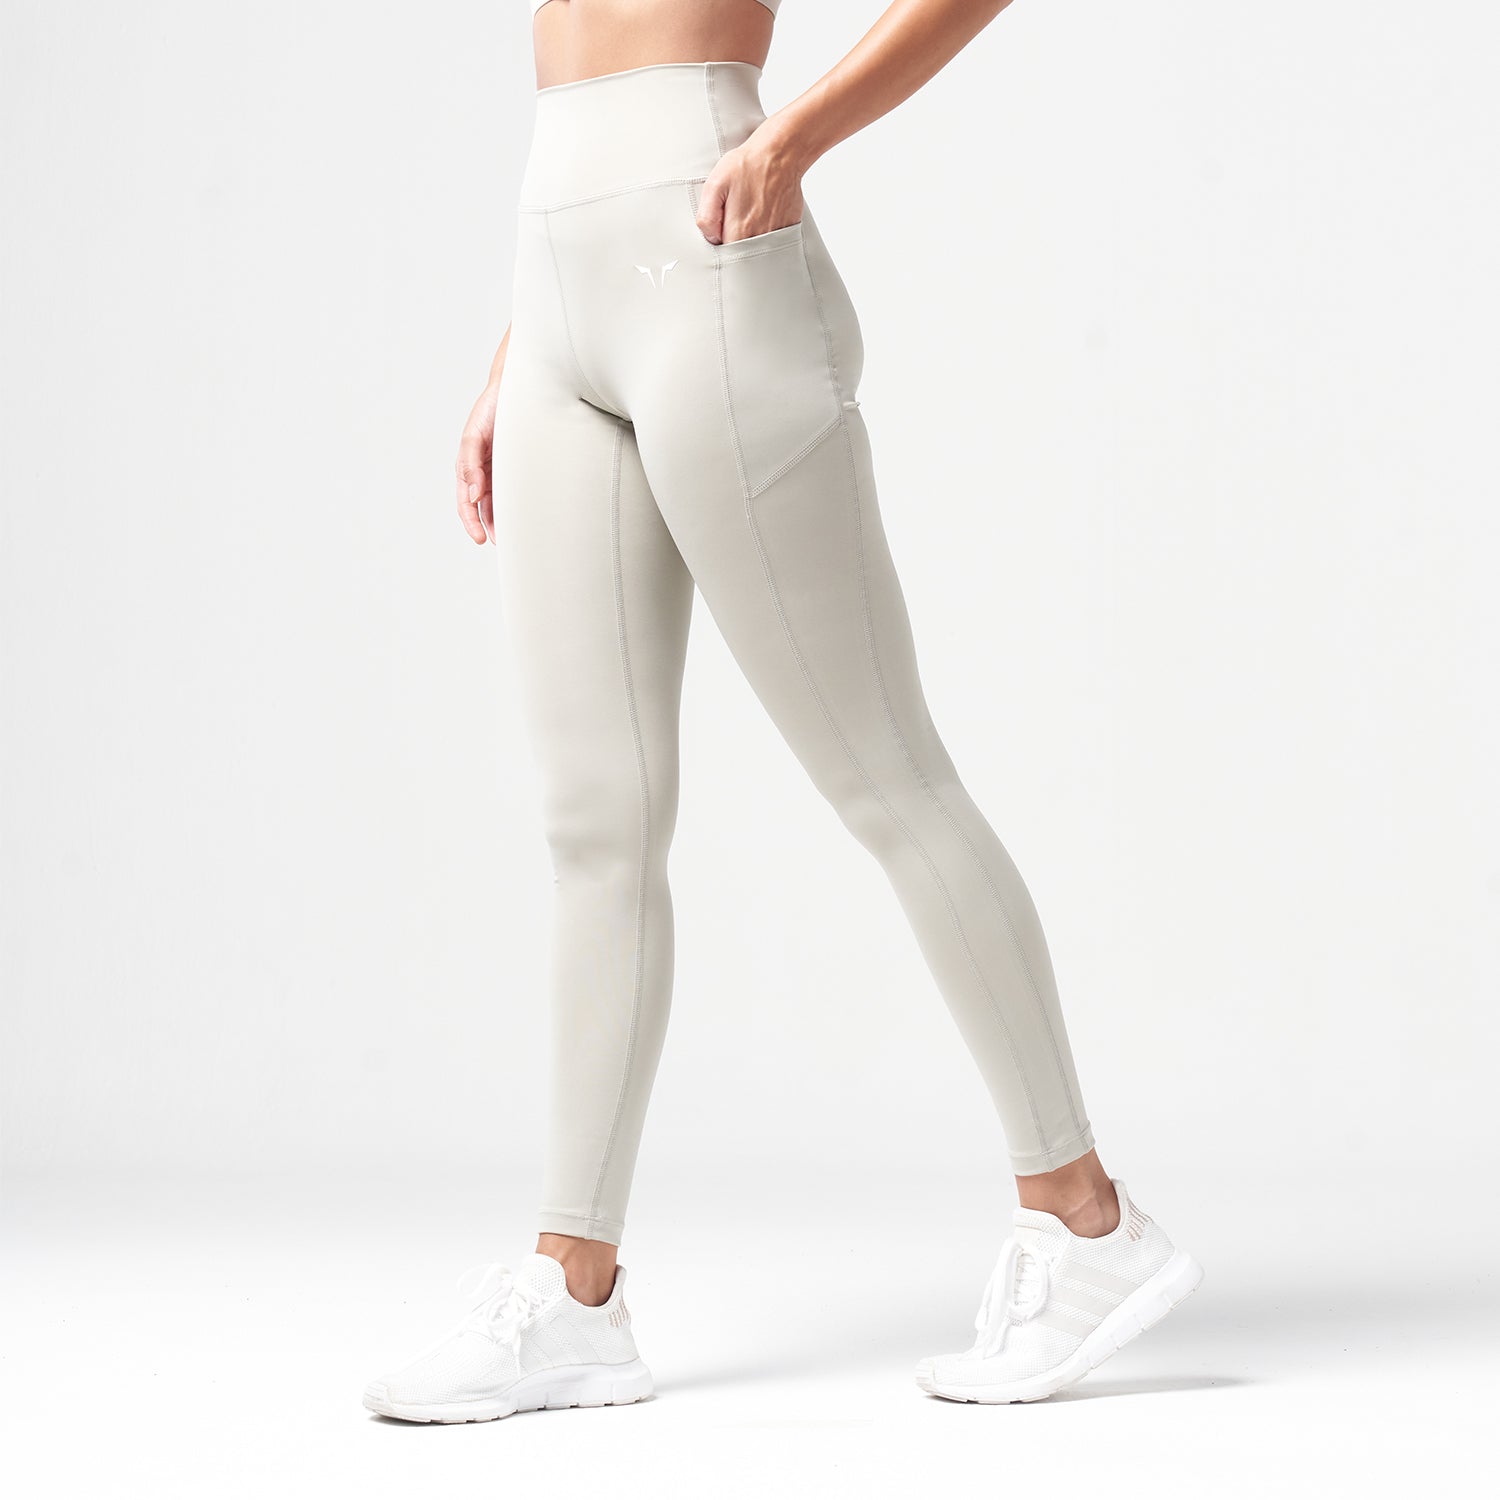 Essential High Waisted Leggings - Willow Grey | Workout Leggings Women